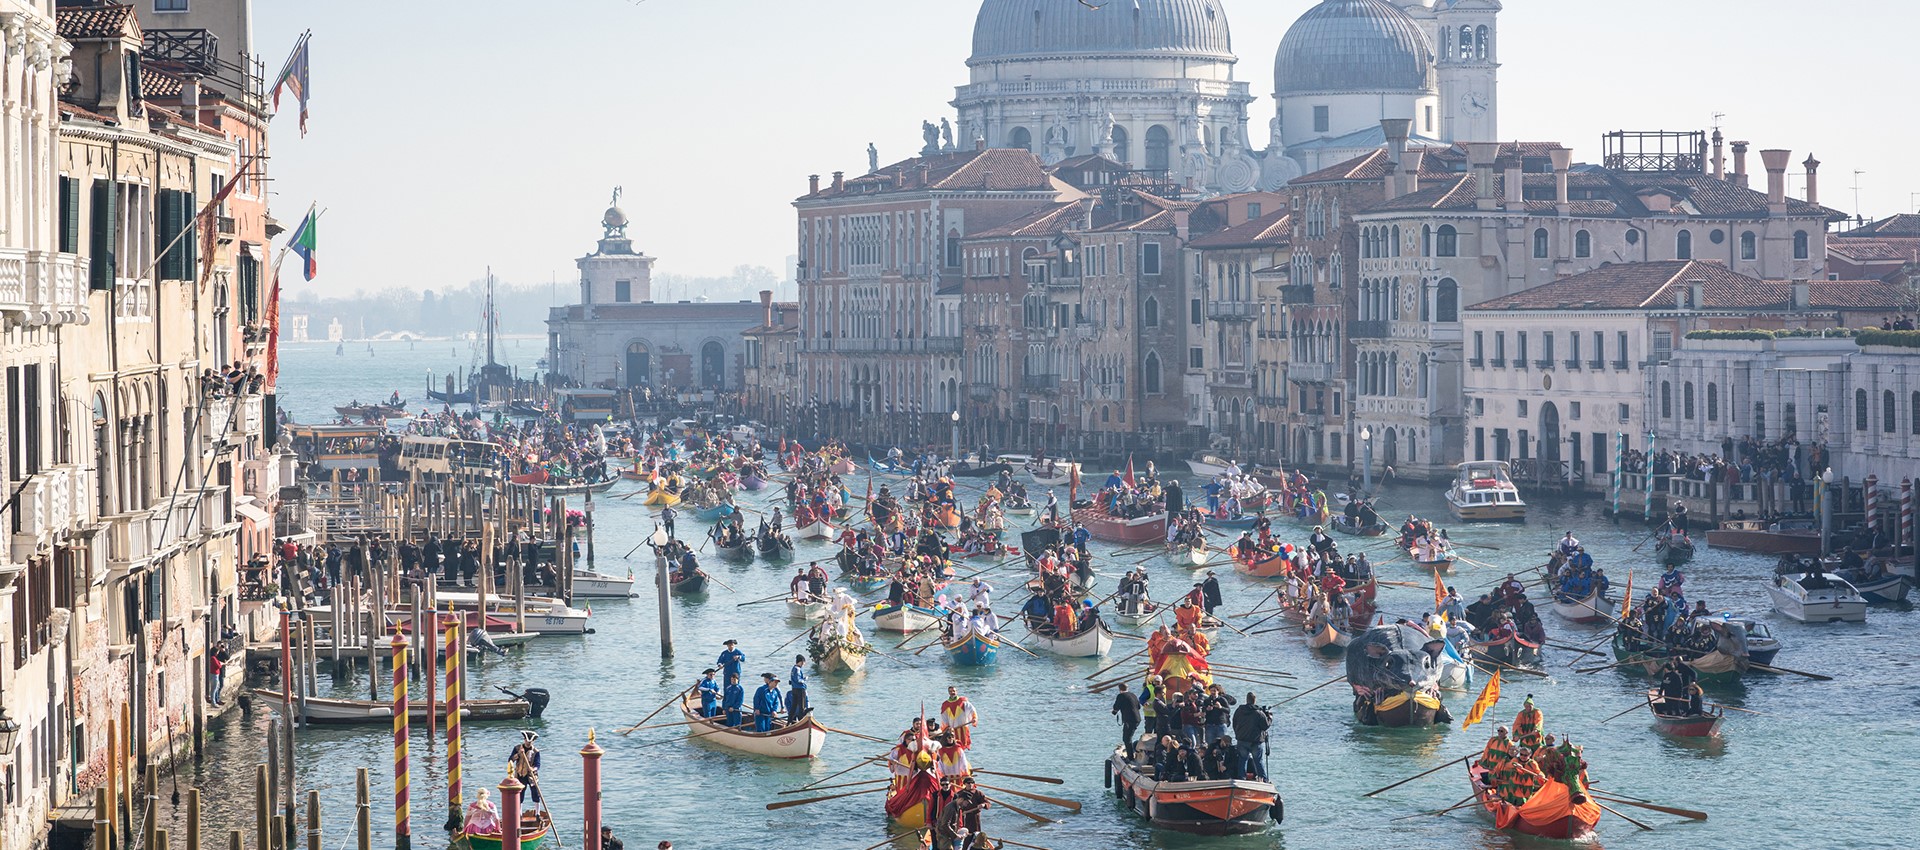 Tailored travel planning in Venice for the carnival experience by Bond travel agency in Italy